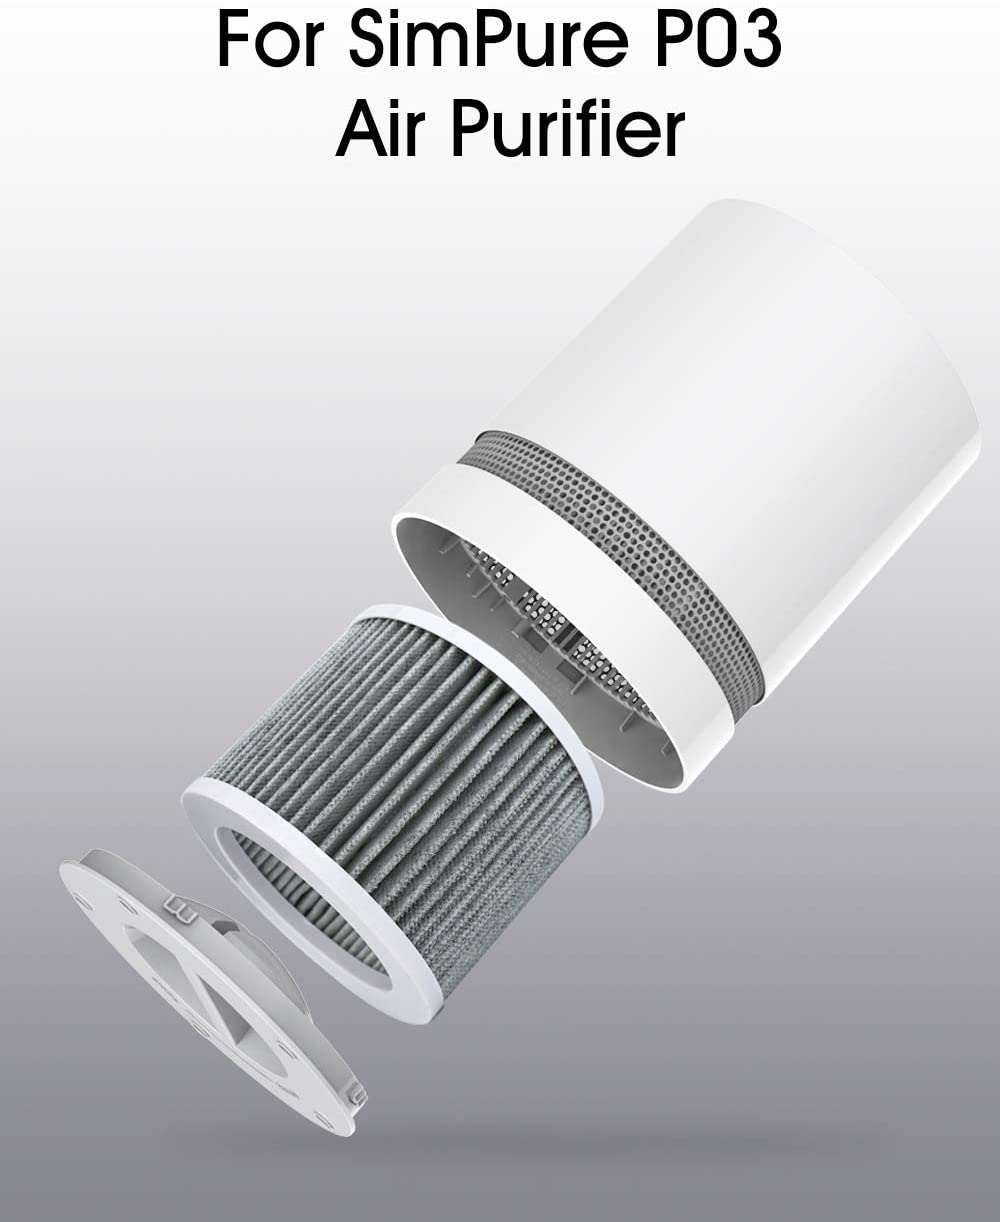 SimPure P03 Air Purifier Replacement Filter